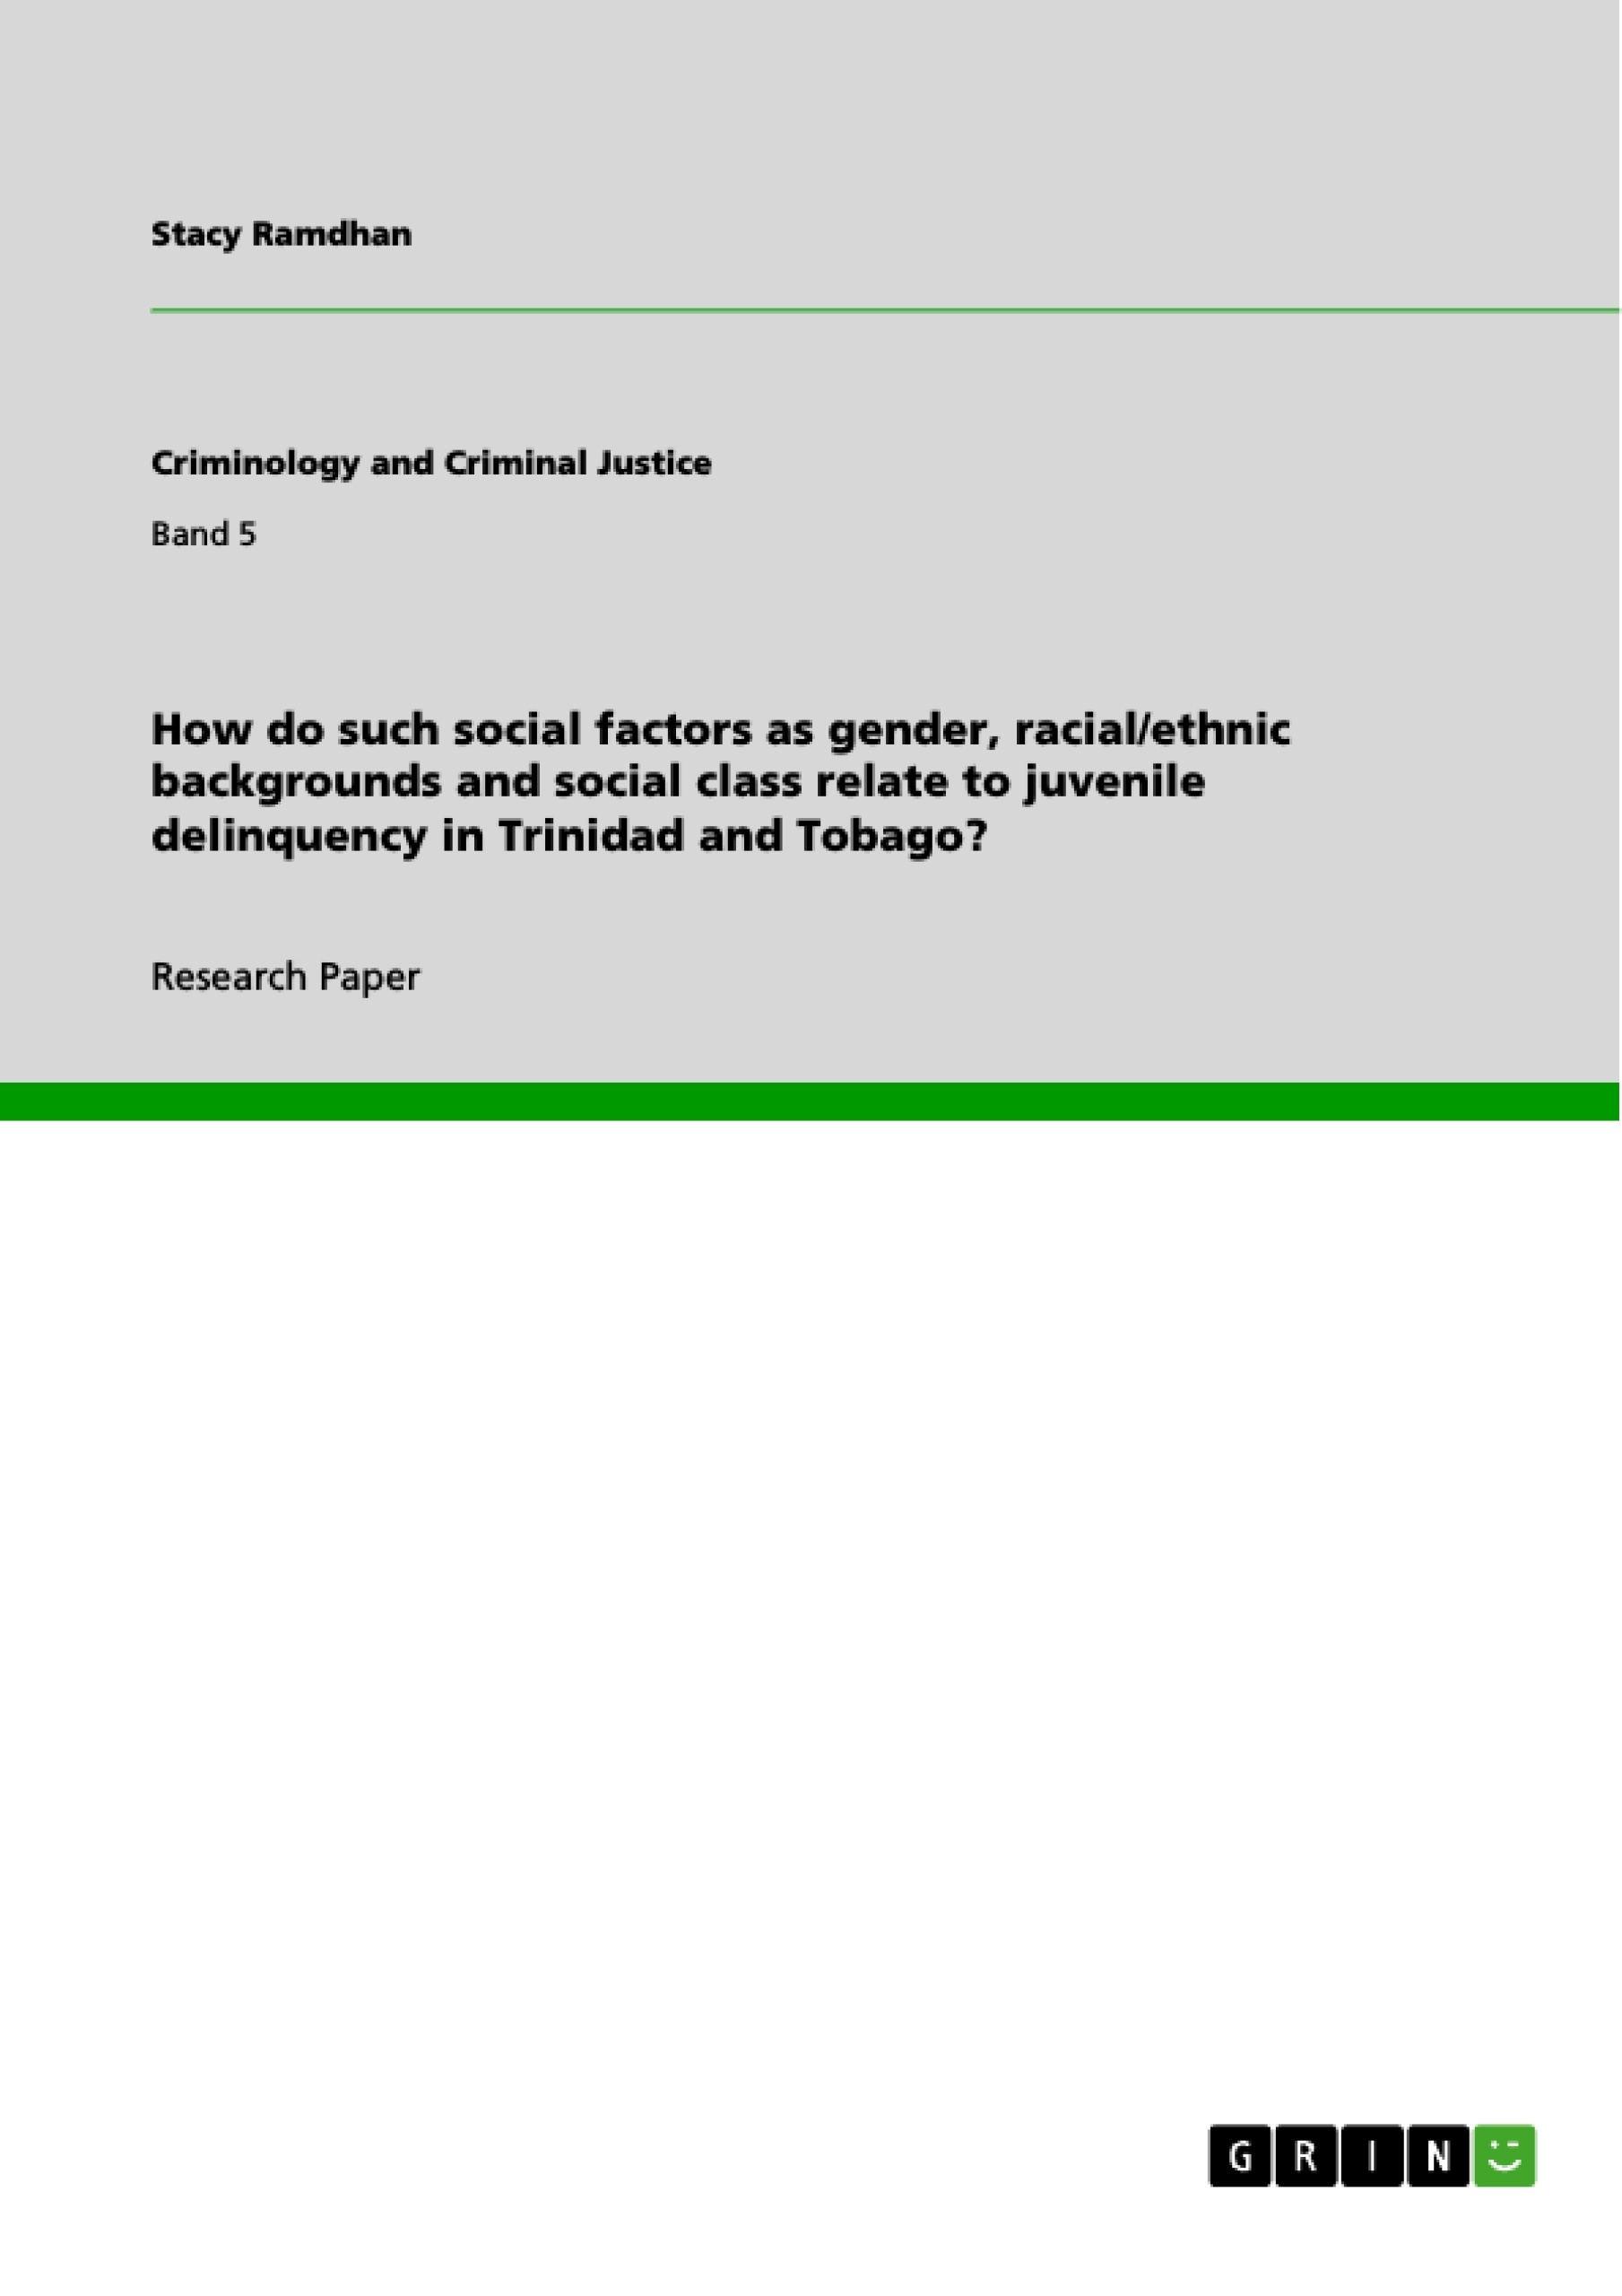 Titel: How do such social factors as gender, racial/ethnic backgrounds and social class relate to juvenile delinquency in Trinidad and Tobago?